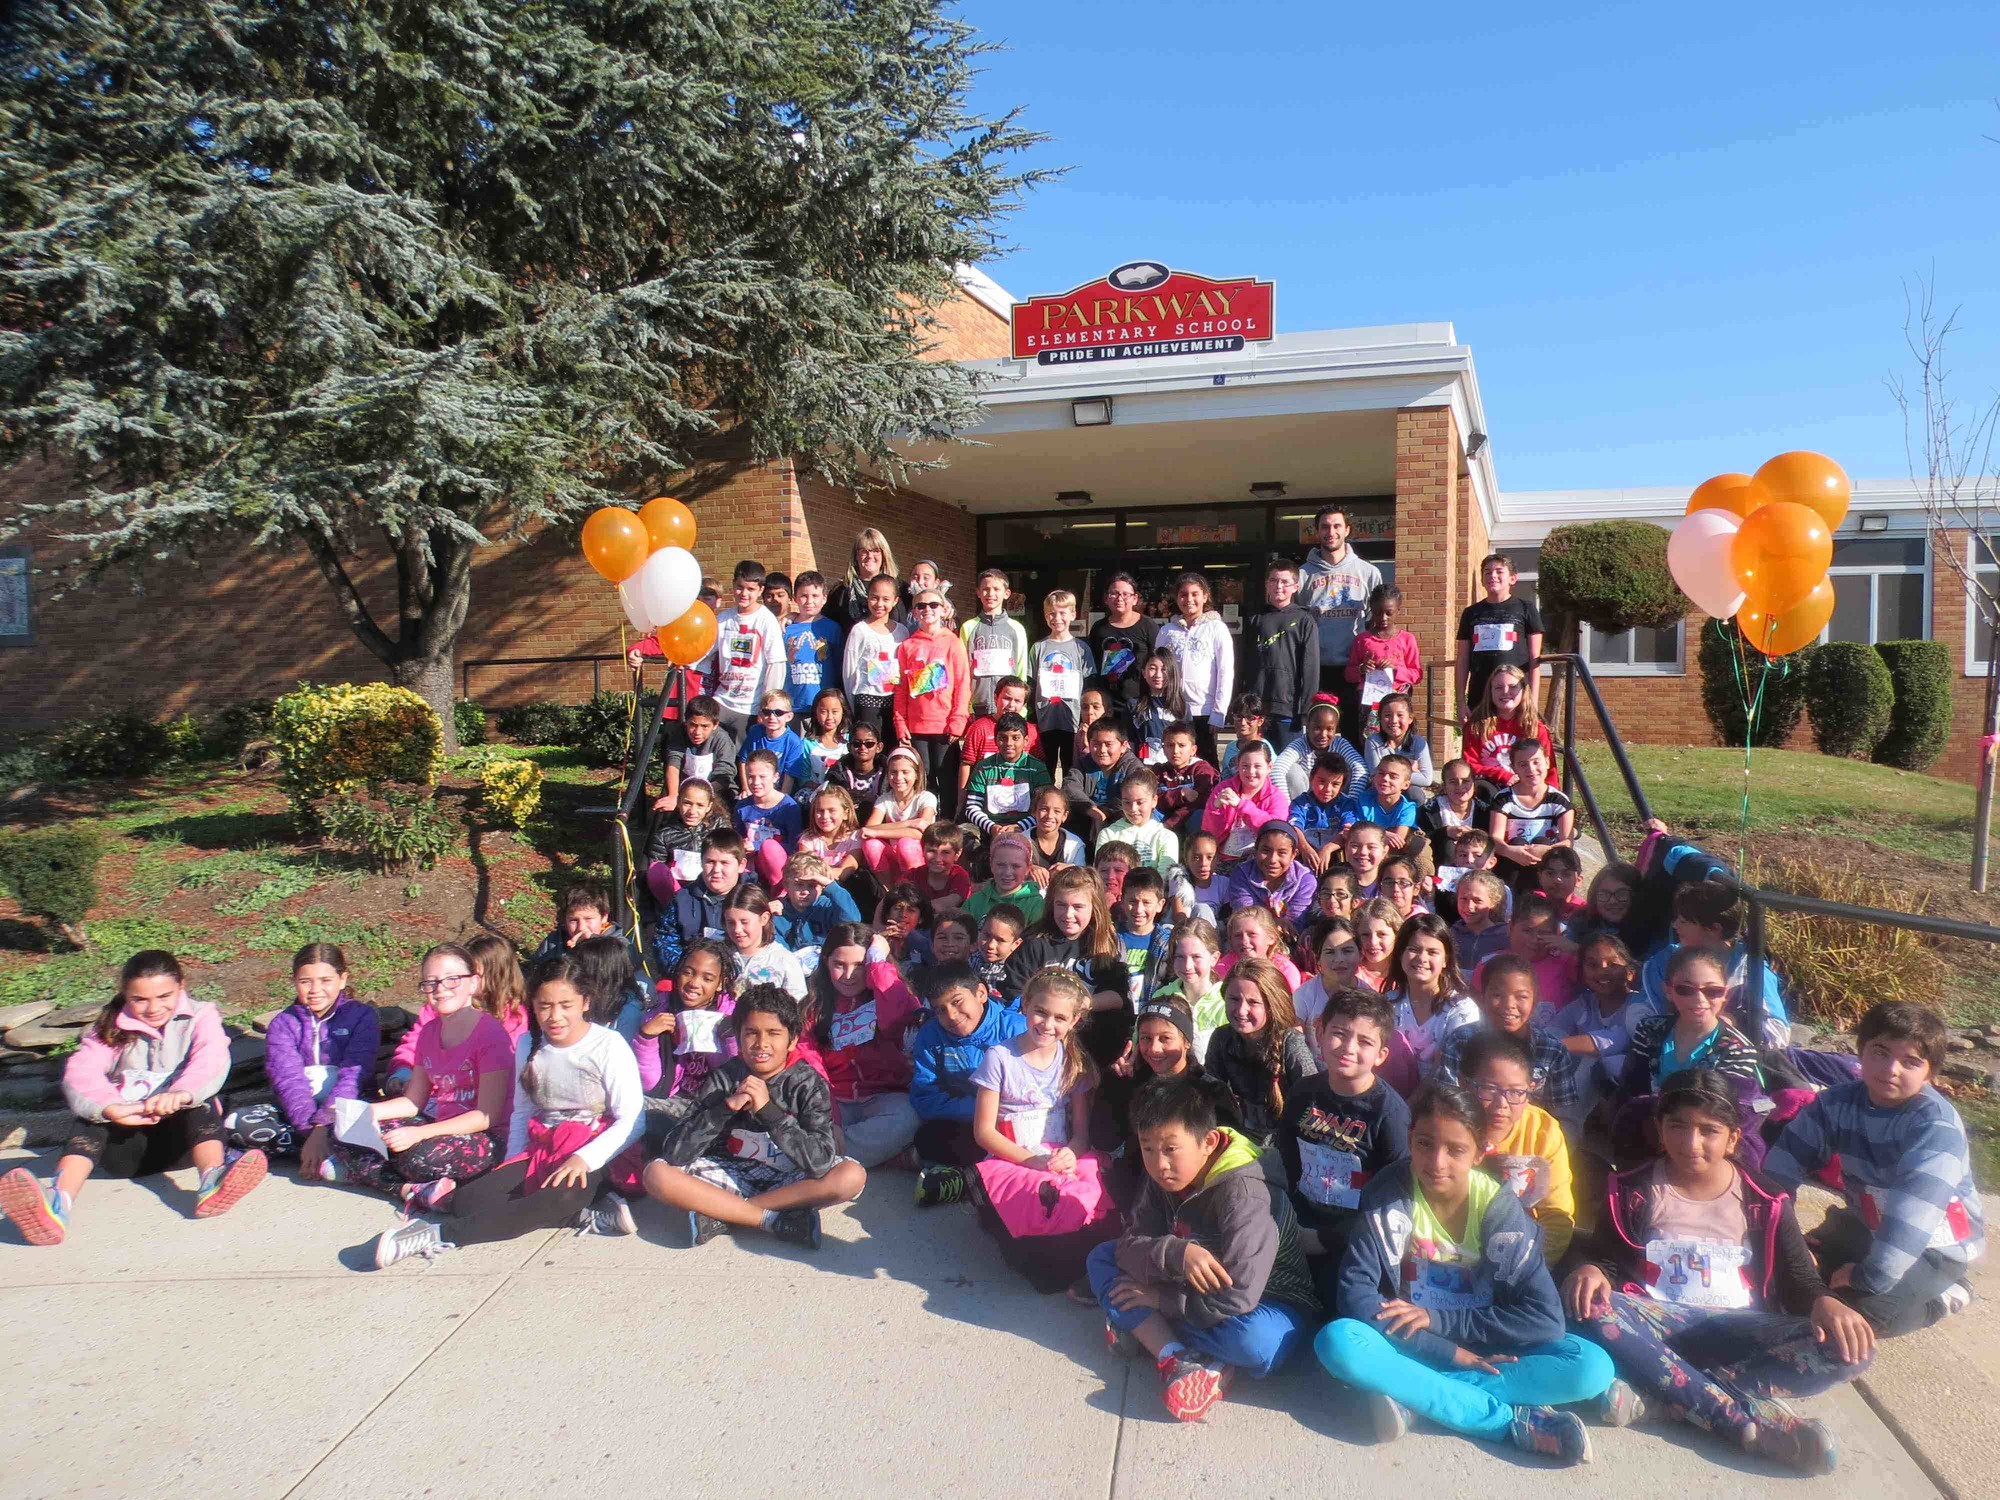 Parkway Elementary School students participated in the Turkey Trot on Wednesday, Nov. 25.